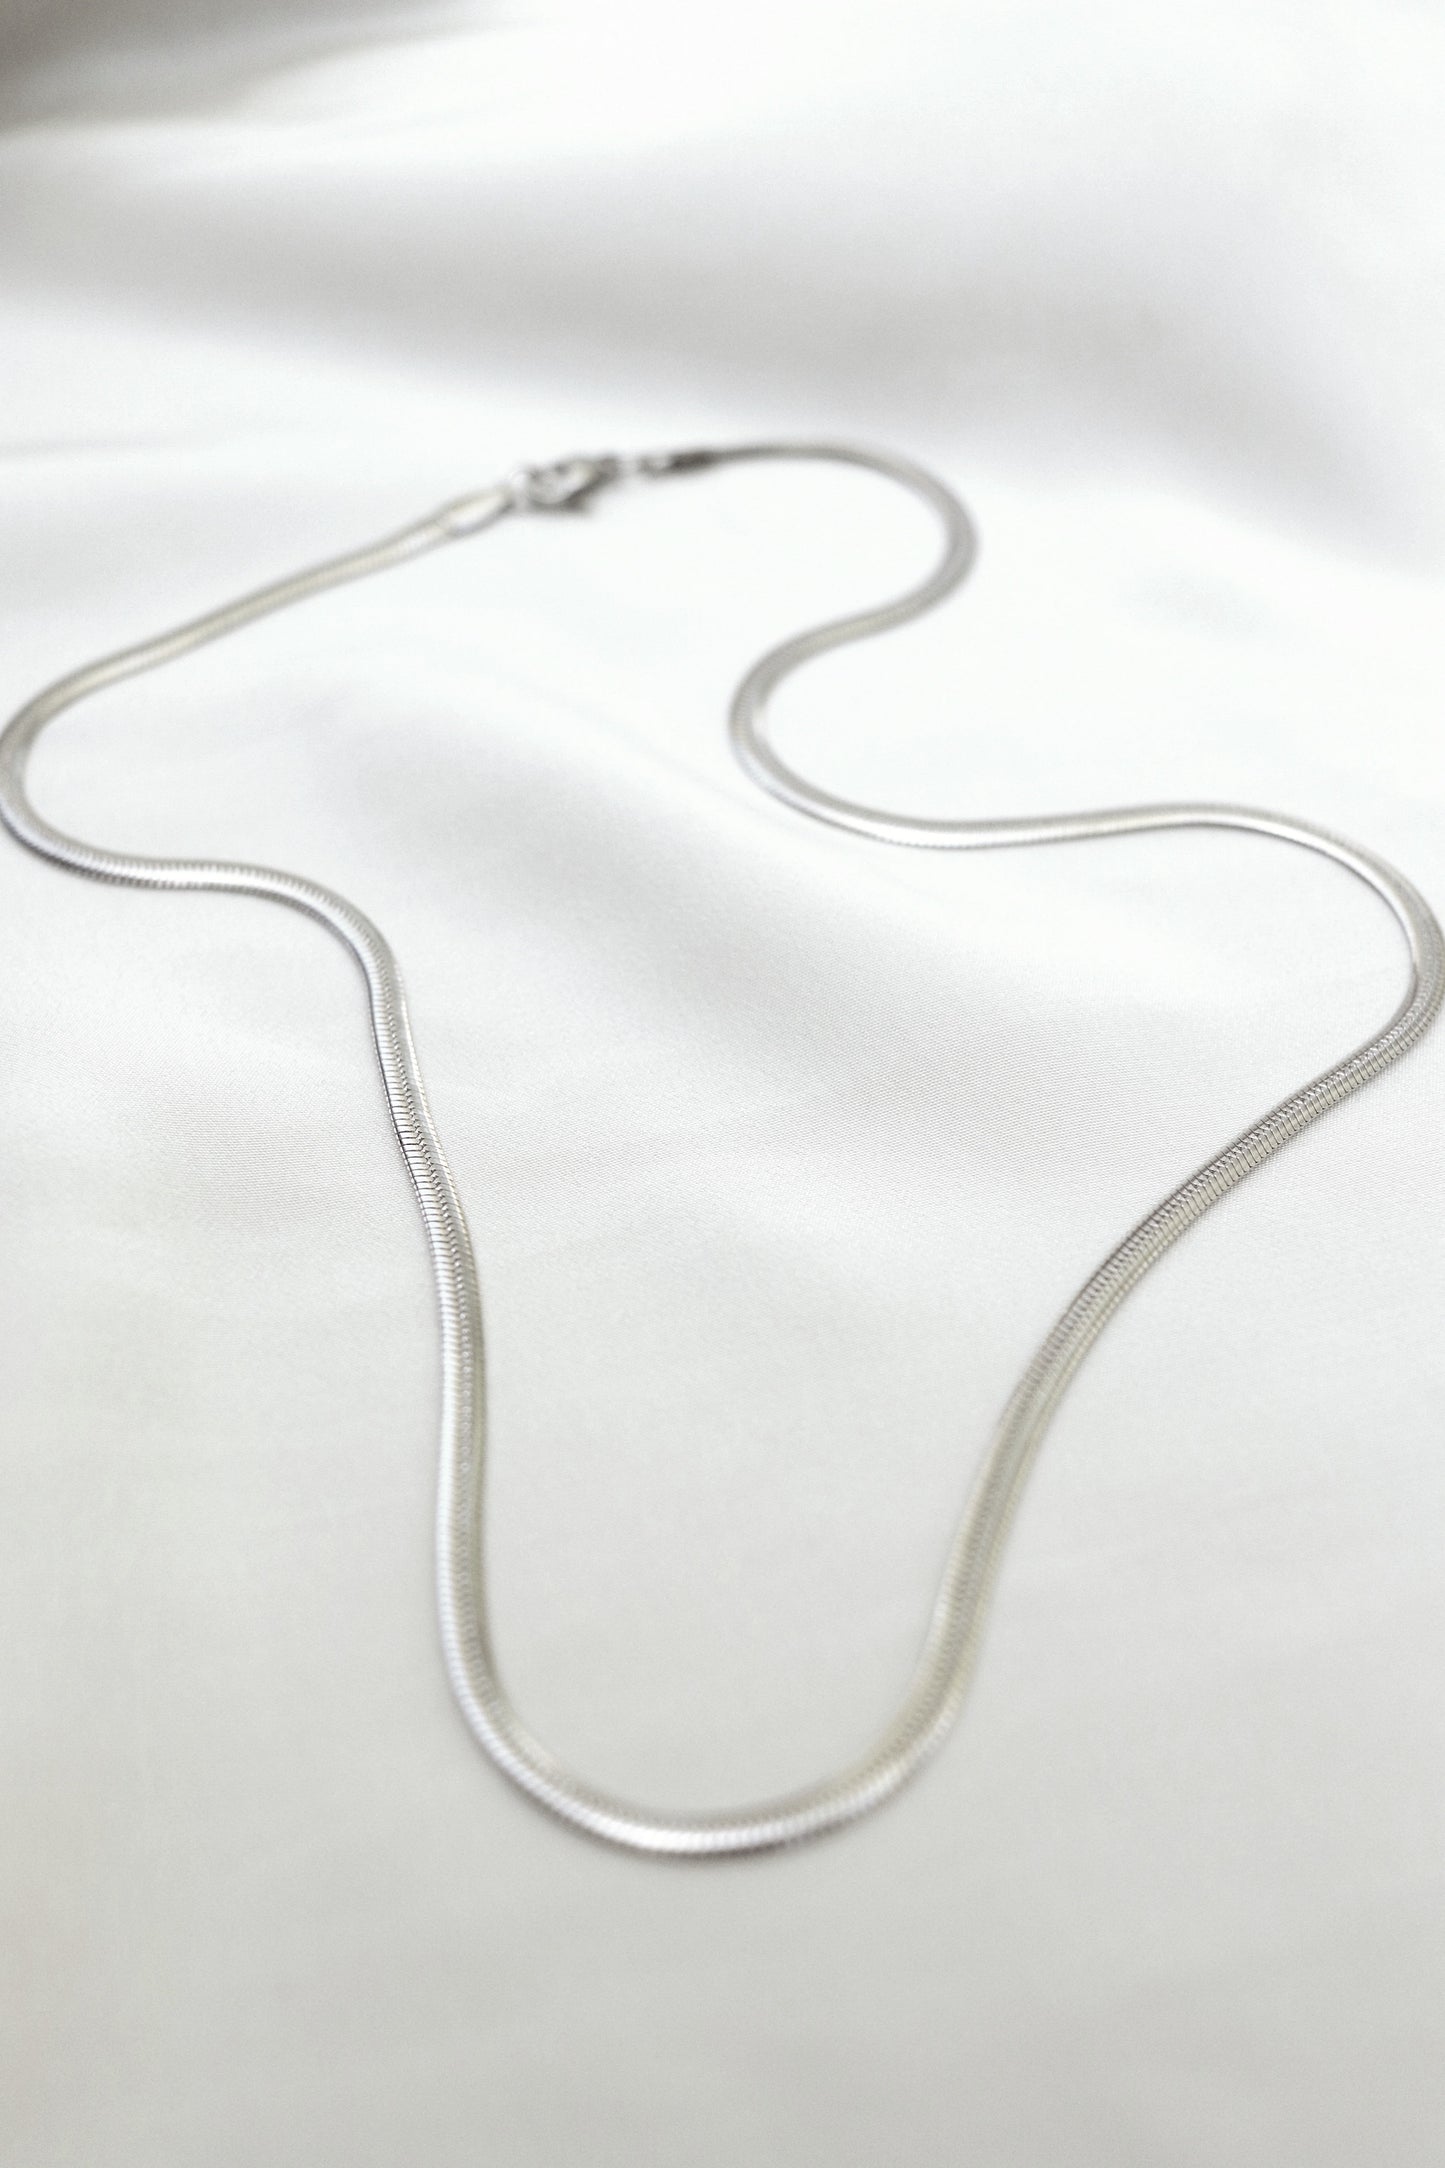 Flat Snake Chain Necklace - Silver